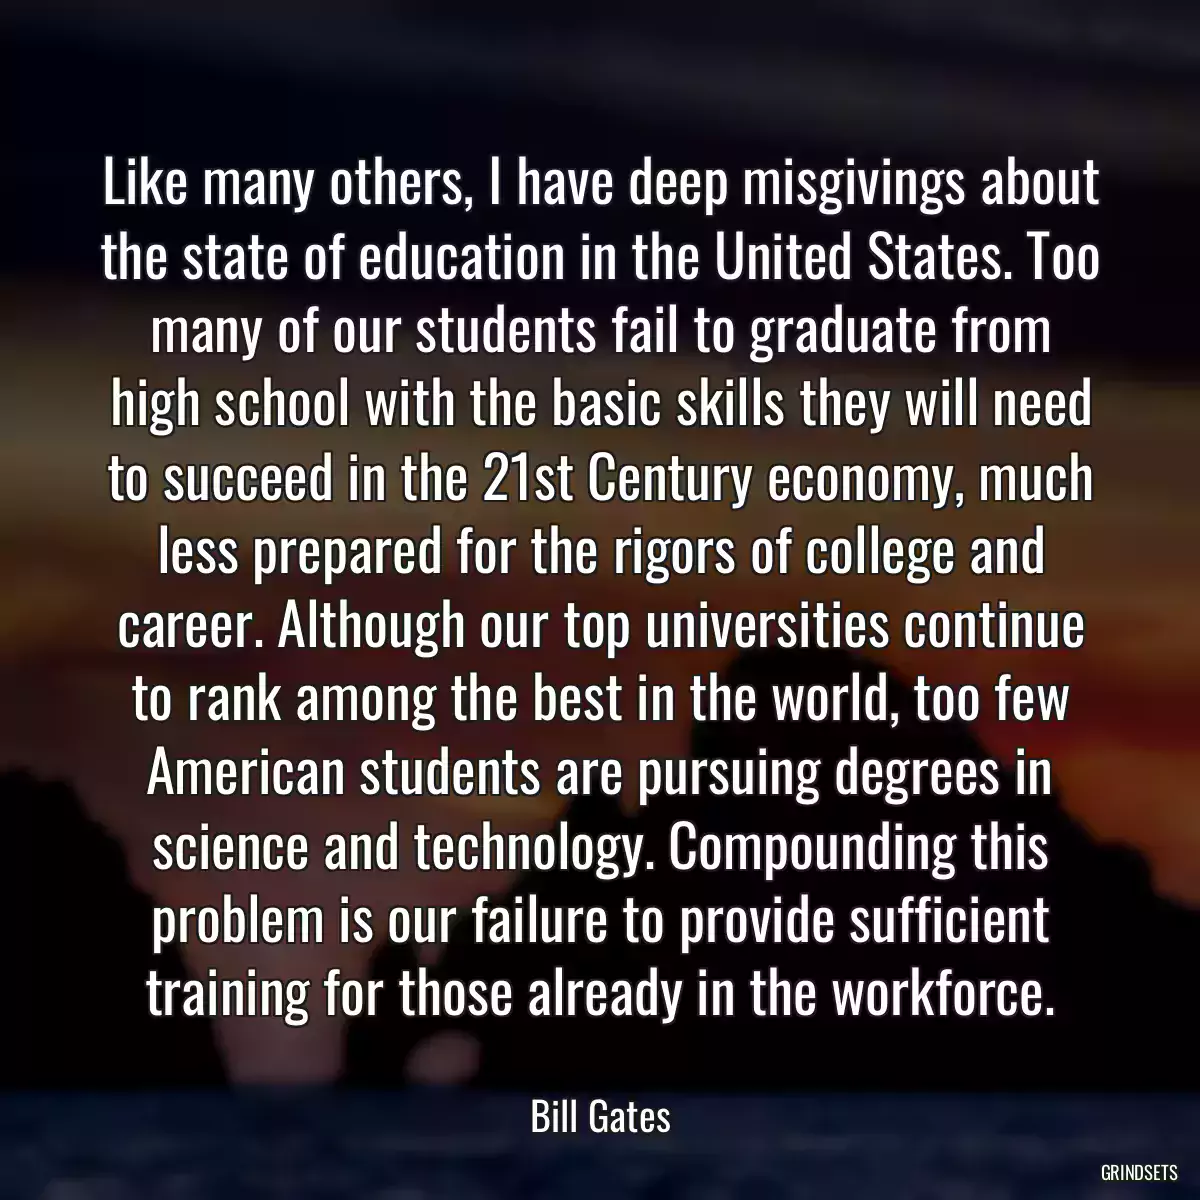 Like many others, I have deep misgivings about the state of education in the United States. Too many of our students fail to graduate from high school with the basic skills they will need to succeed in the 21st Century economy, much less prepared for the rigors of college and career. Although our top universities continue to rank among the best in the world, too few American students are pursuing degrees in science and technology. Compounding this problem is our failure to provide sufficient training for those already in the workforce.